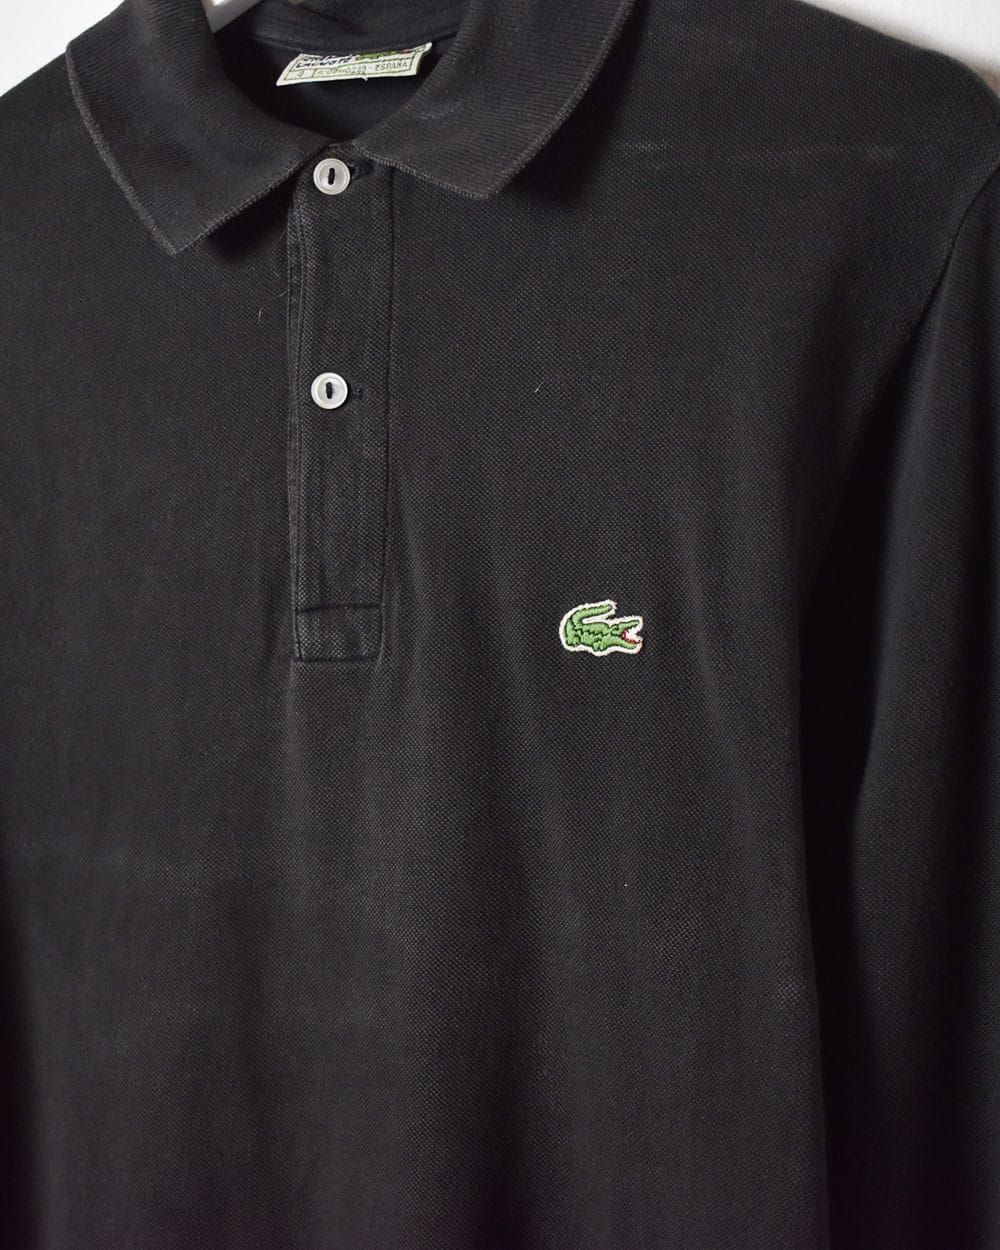 Black Chemise Lacoste Long Sleeved Polo Shirt - Small